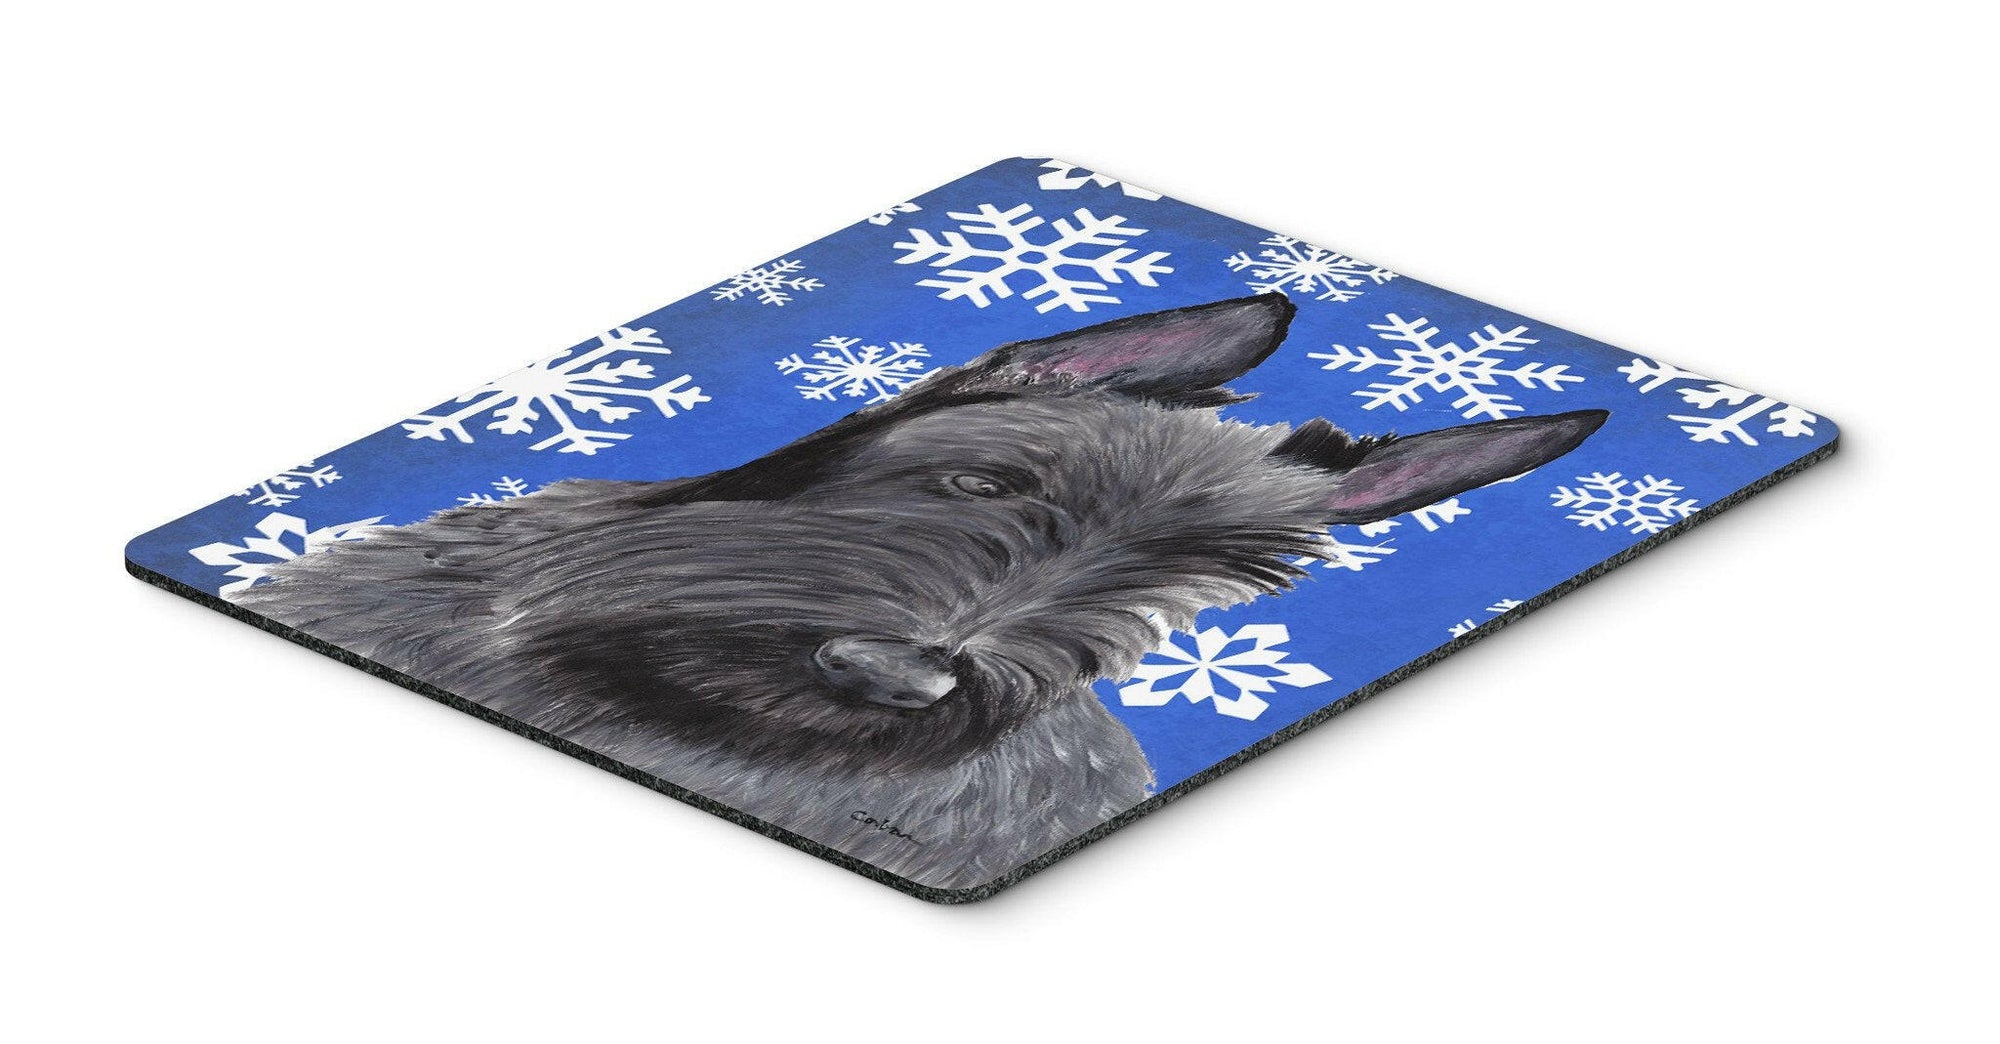 Scottish Terrier Winter Snowflakes Holiday Mouse Pad, Hot Pad or Trivet by Caroline's Treasures